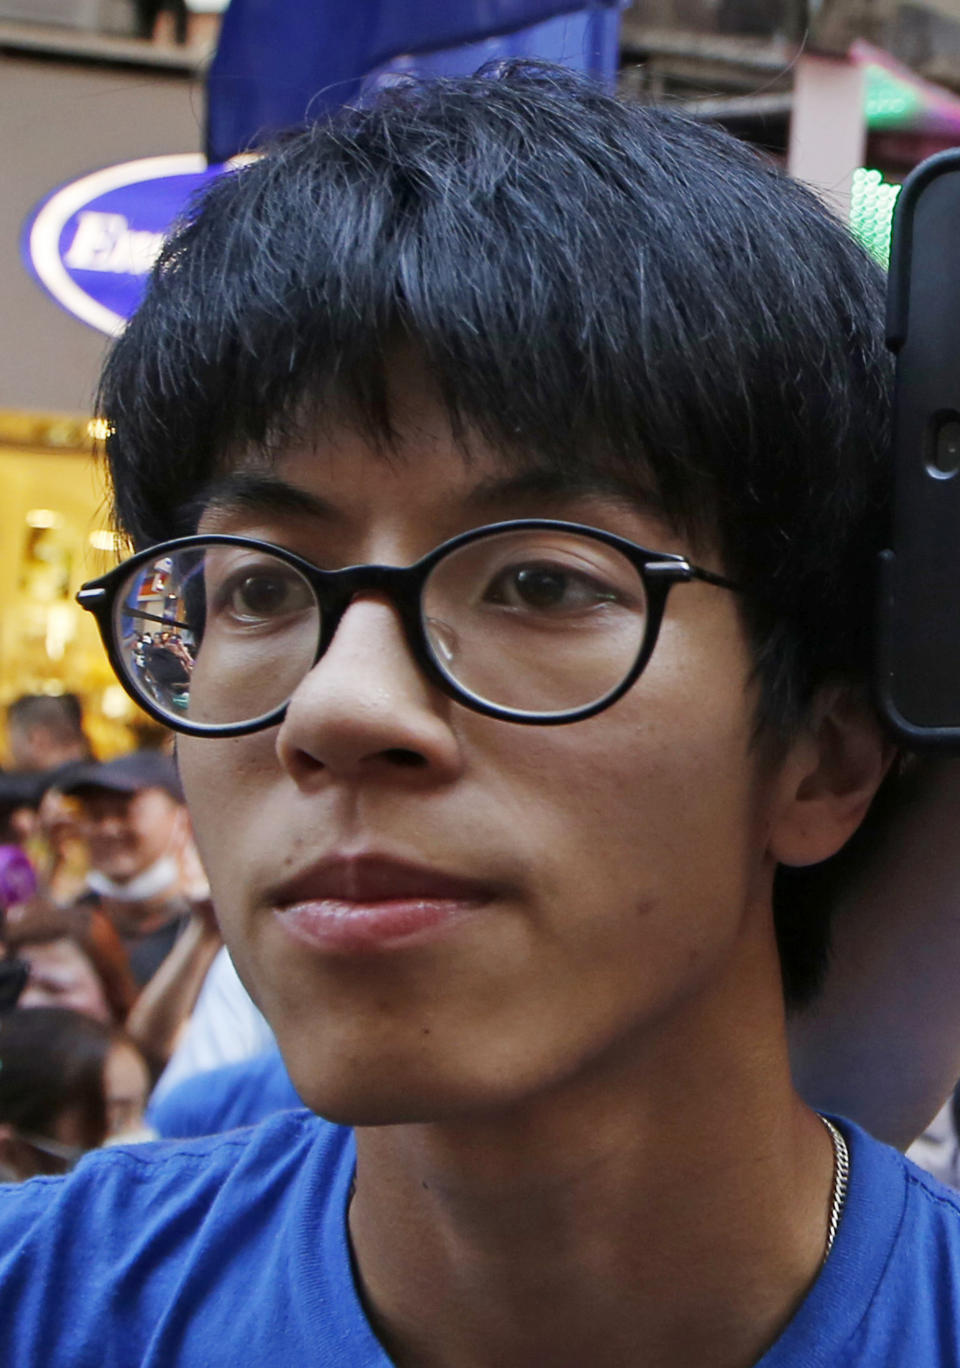 In this Saturday, July 11, 2015 photo, Ray Wong Toi-yeung, member of Hong Kong Indigenous group attends a demonstration in Hong Kong. Germany has granted asylum to two Hong Kong activists in a sign of growing concern over how dissent is dealt with in the territory. (AP Photo/Kin Cheung)